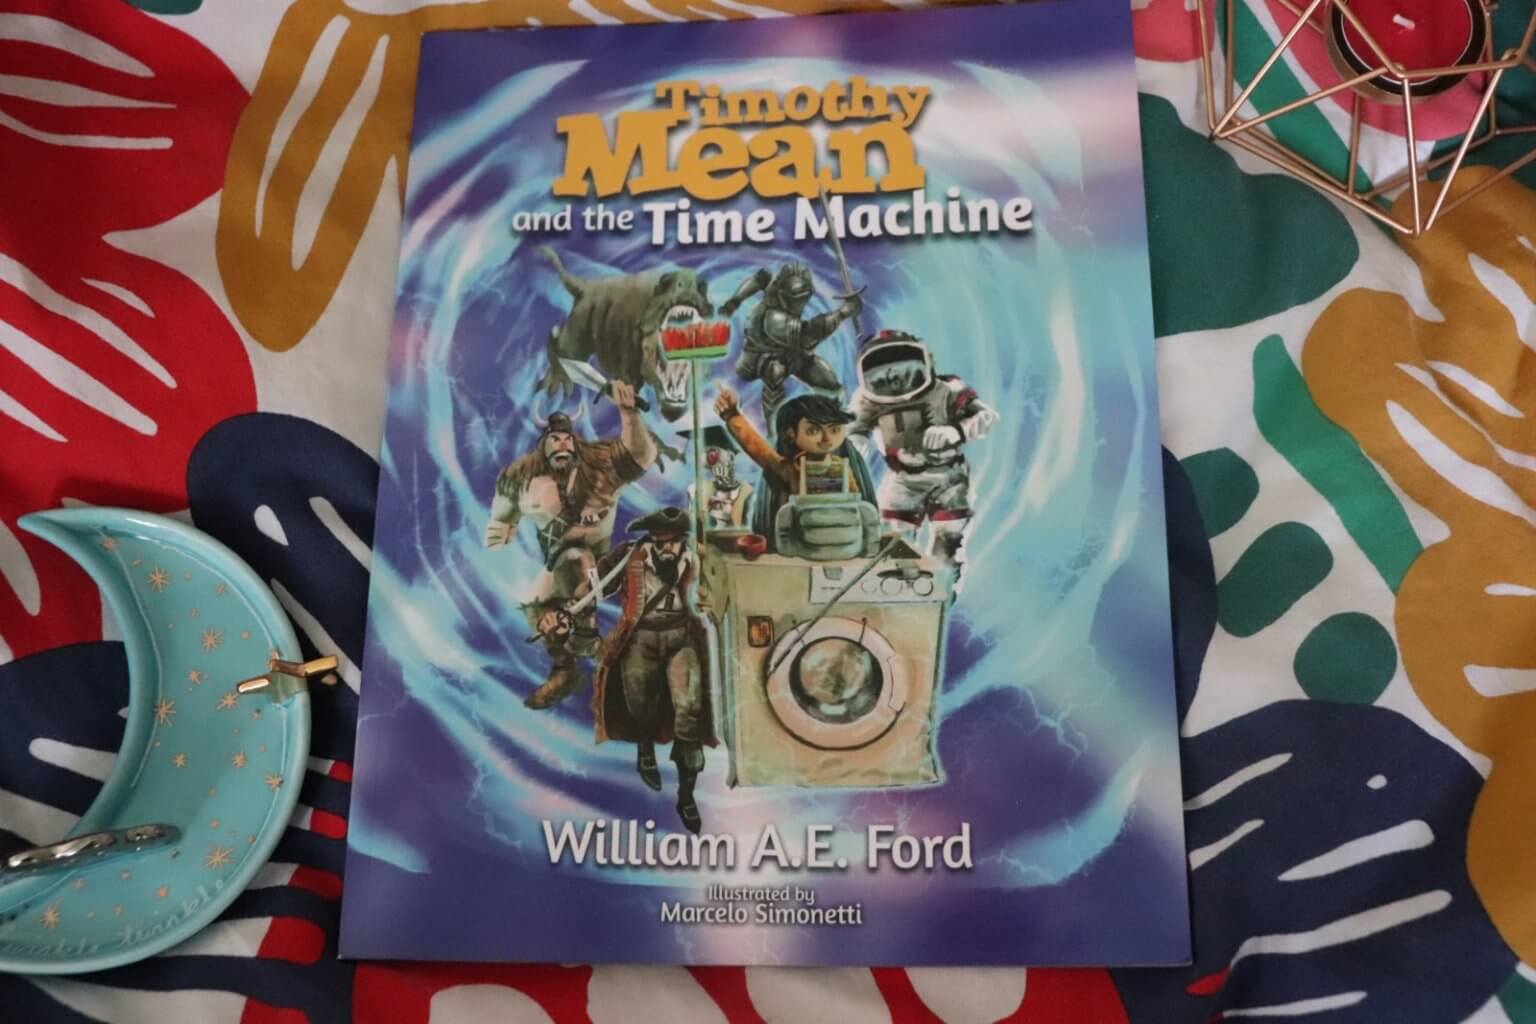 Timothy Mean and the Time Machine by William A.E. Ford